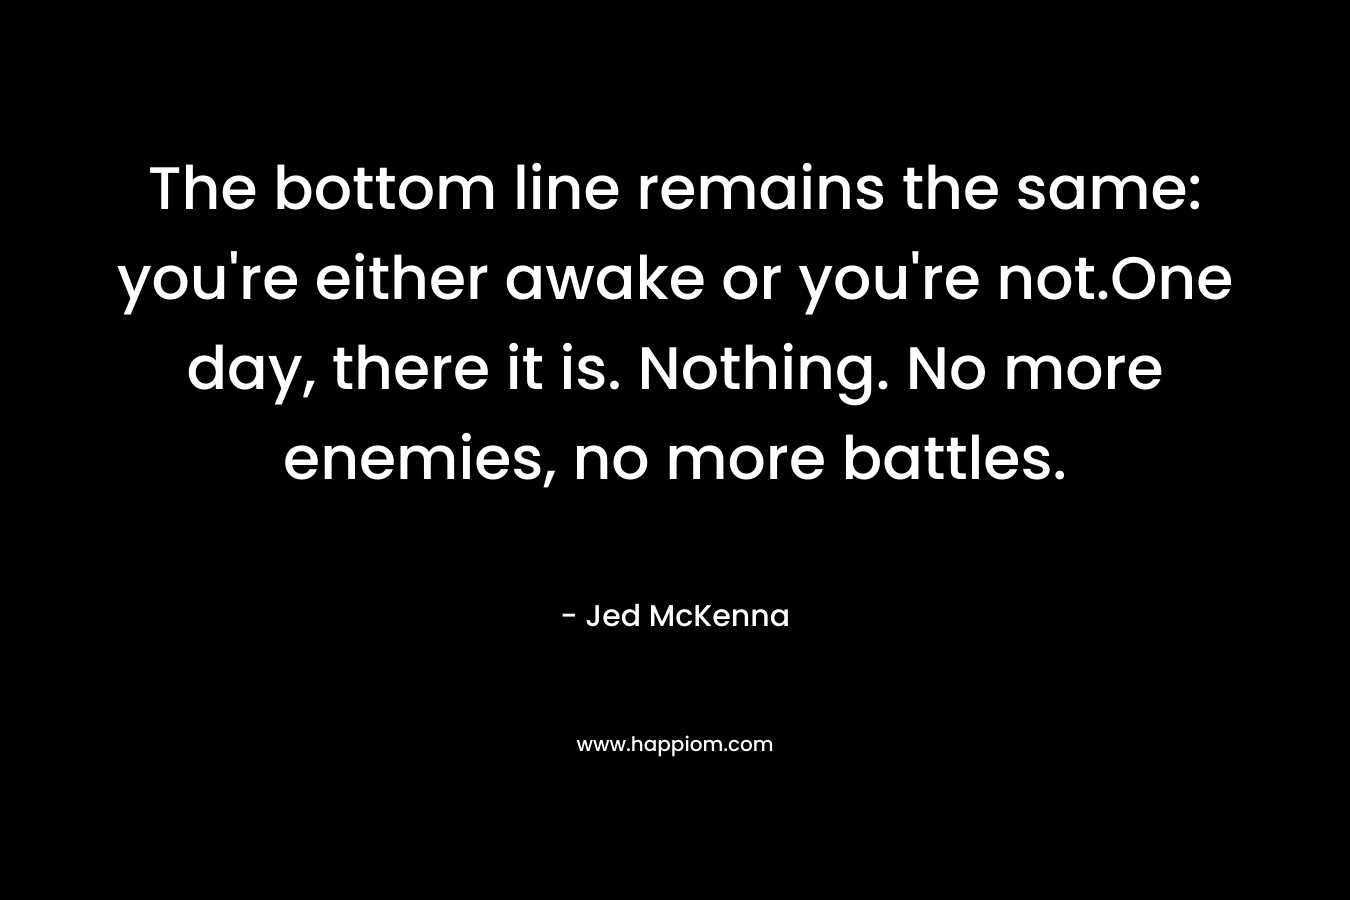 The bottom line remains the same: you’re either awake or you’re not.One day, there it is. Nothing. No more enemies, no more battles. – Jed McKenna